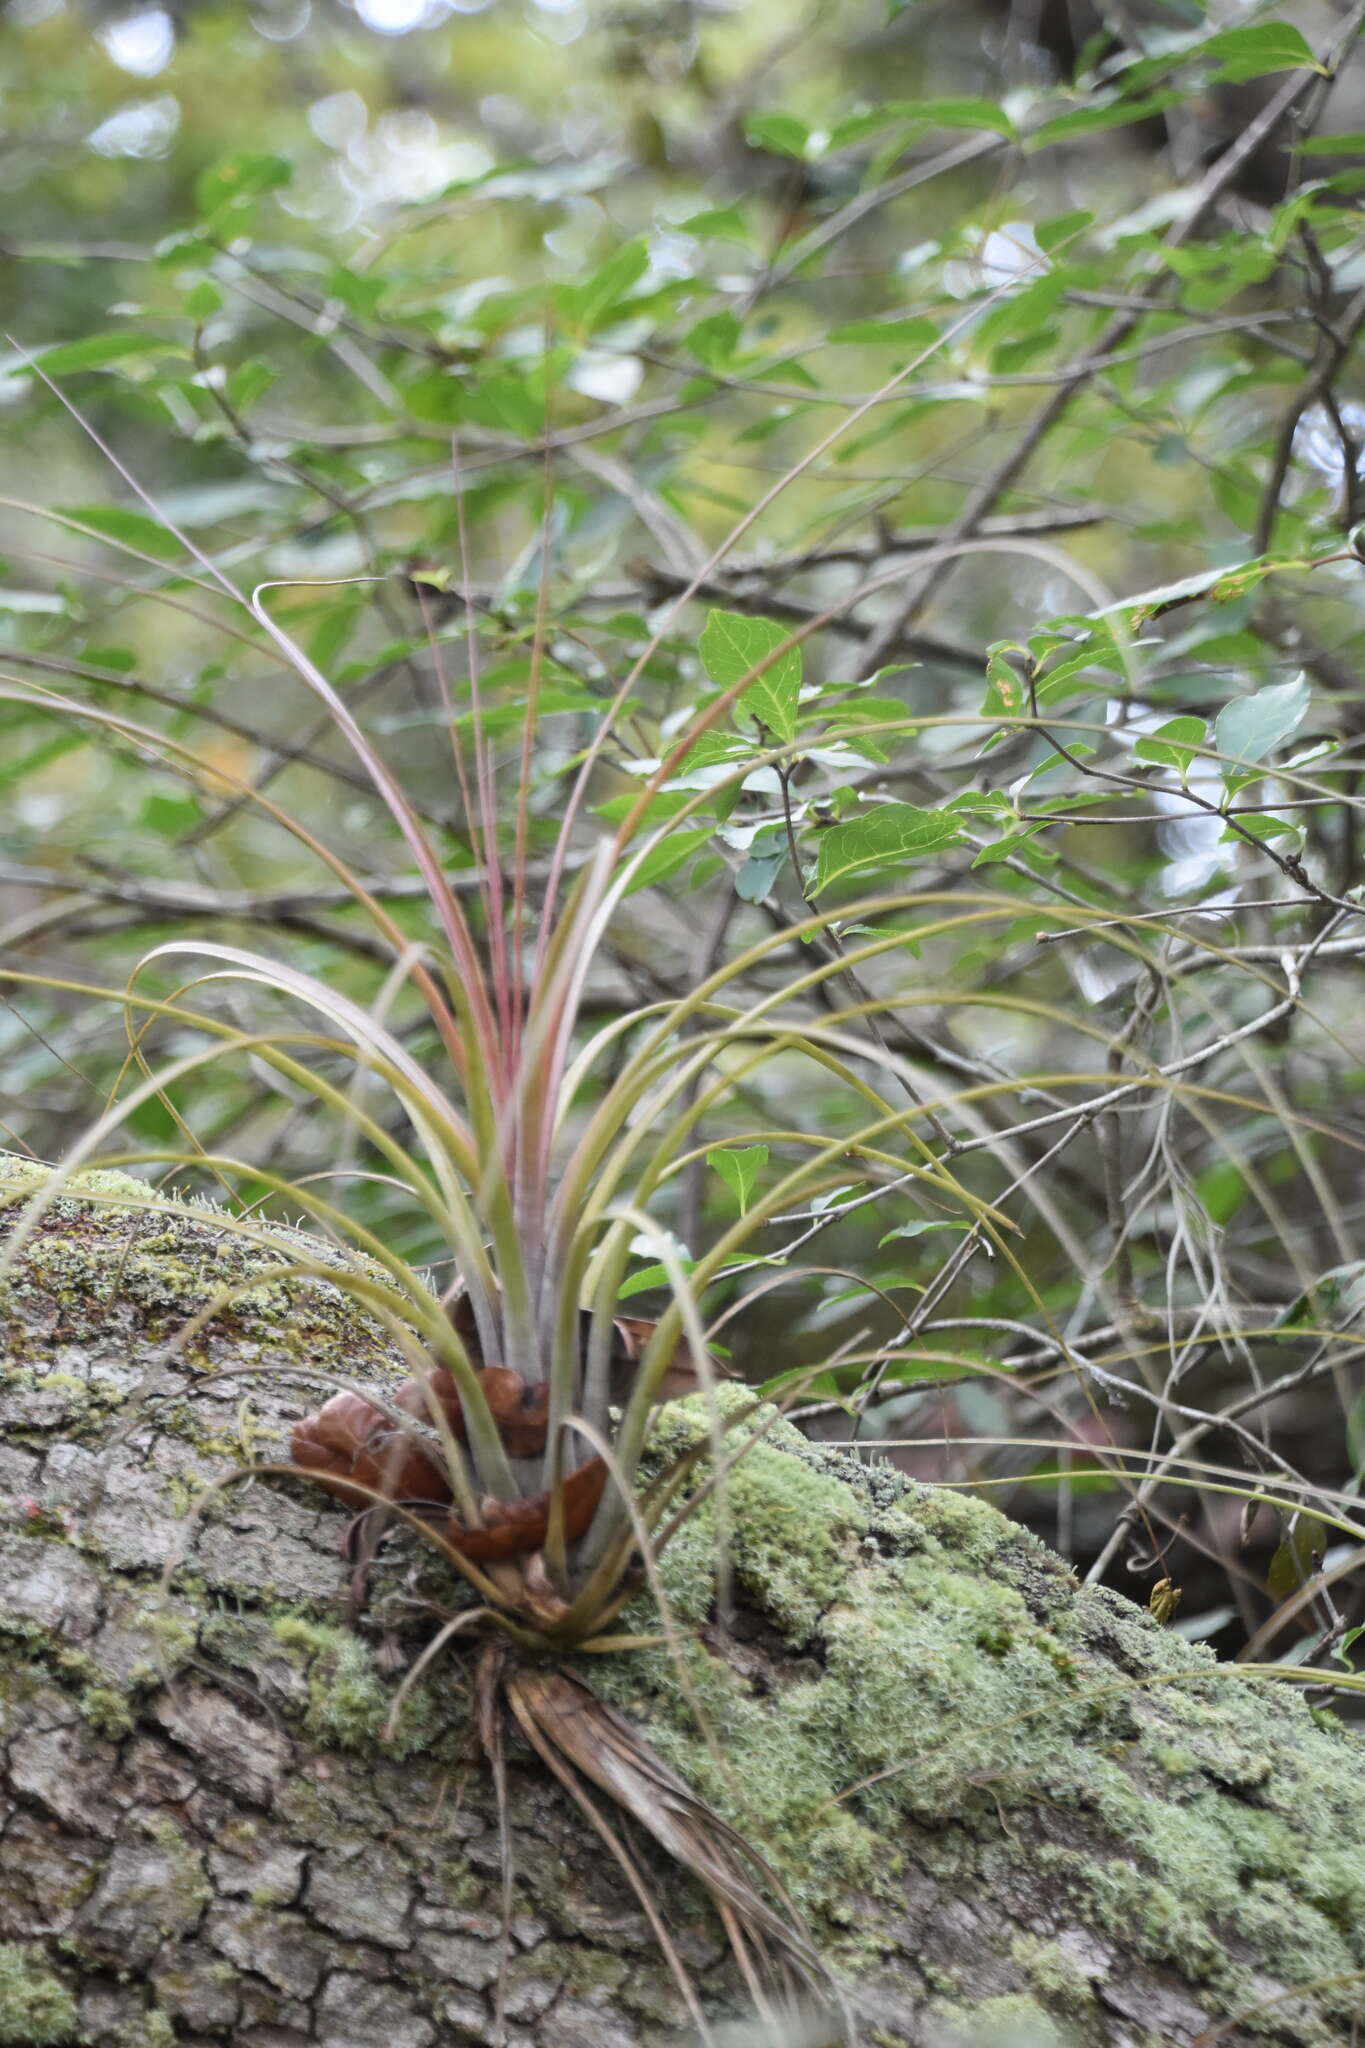 Image of Manatee River airplant